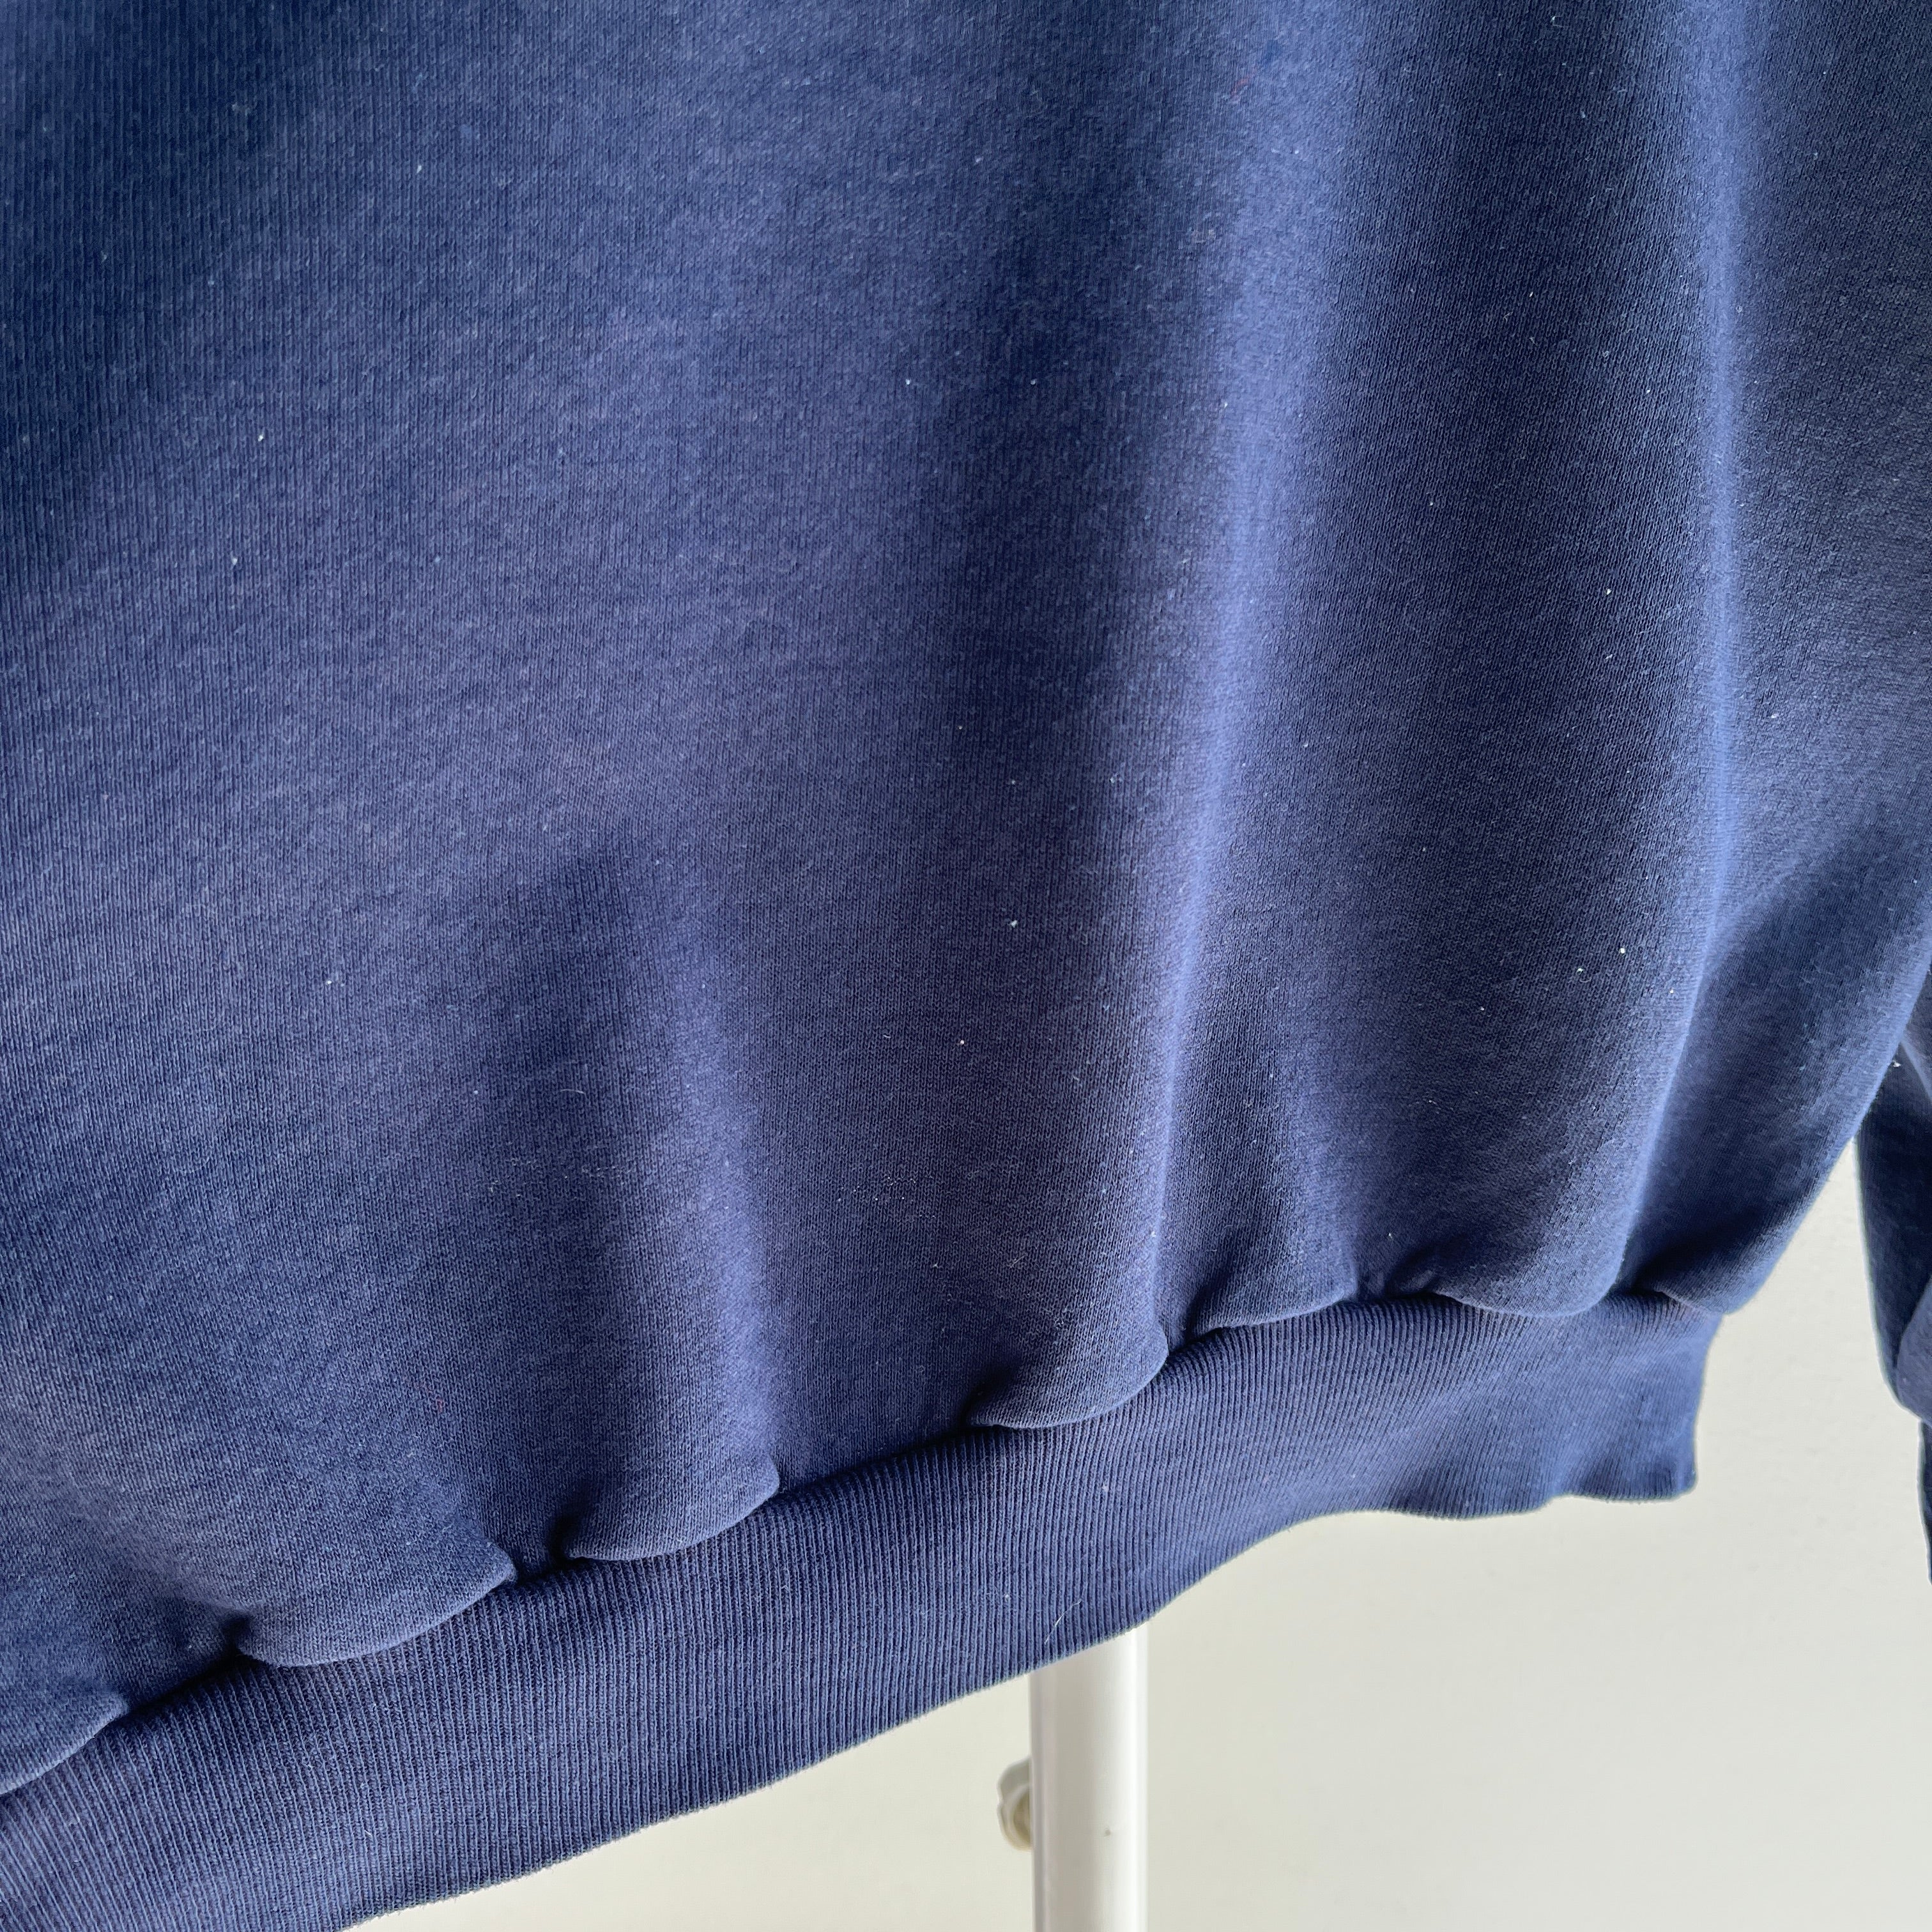 1970s Thinned Out To That Perfect Sheen Blank Navy Raglan Sweatshirt